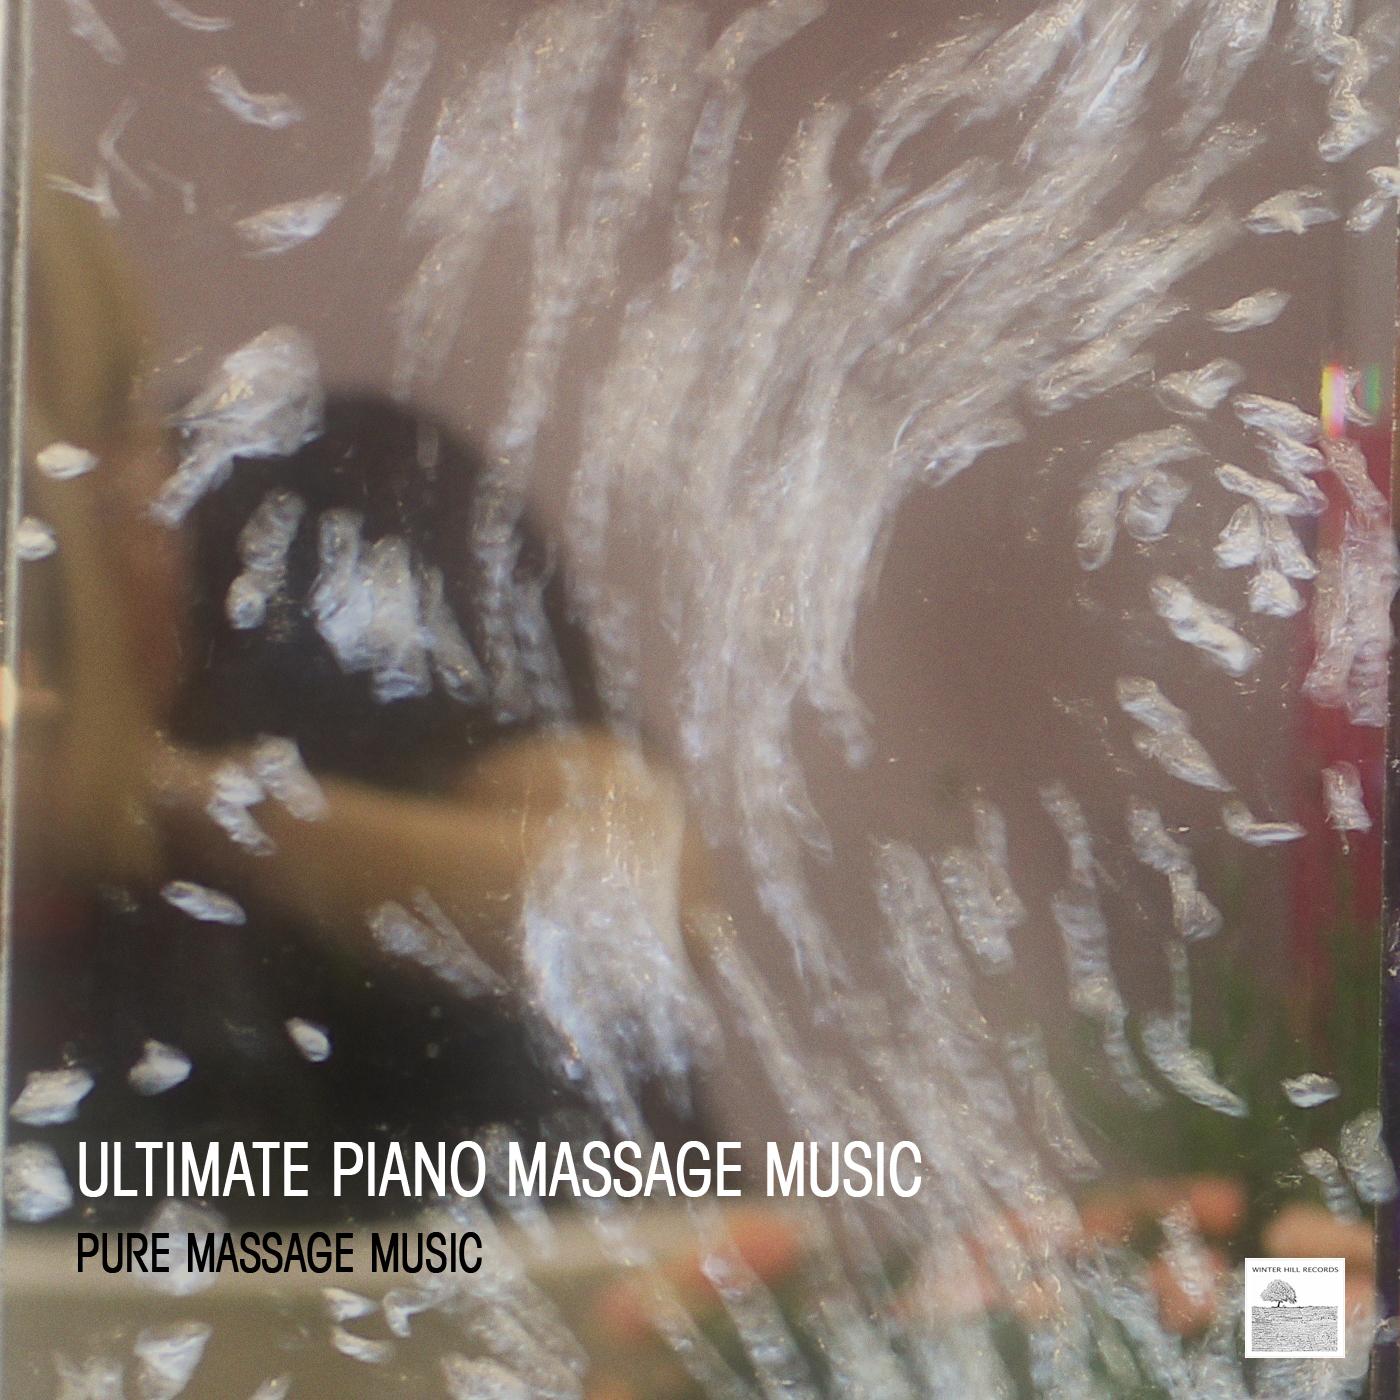 Ultimate Piano Massage Music - Relaxing Piano Music for Meditation, Relaxation, Massage Therapy, Healing, Sleep, Yoga and Spa